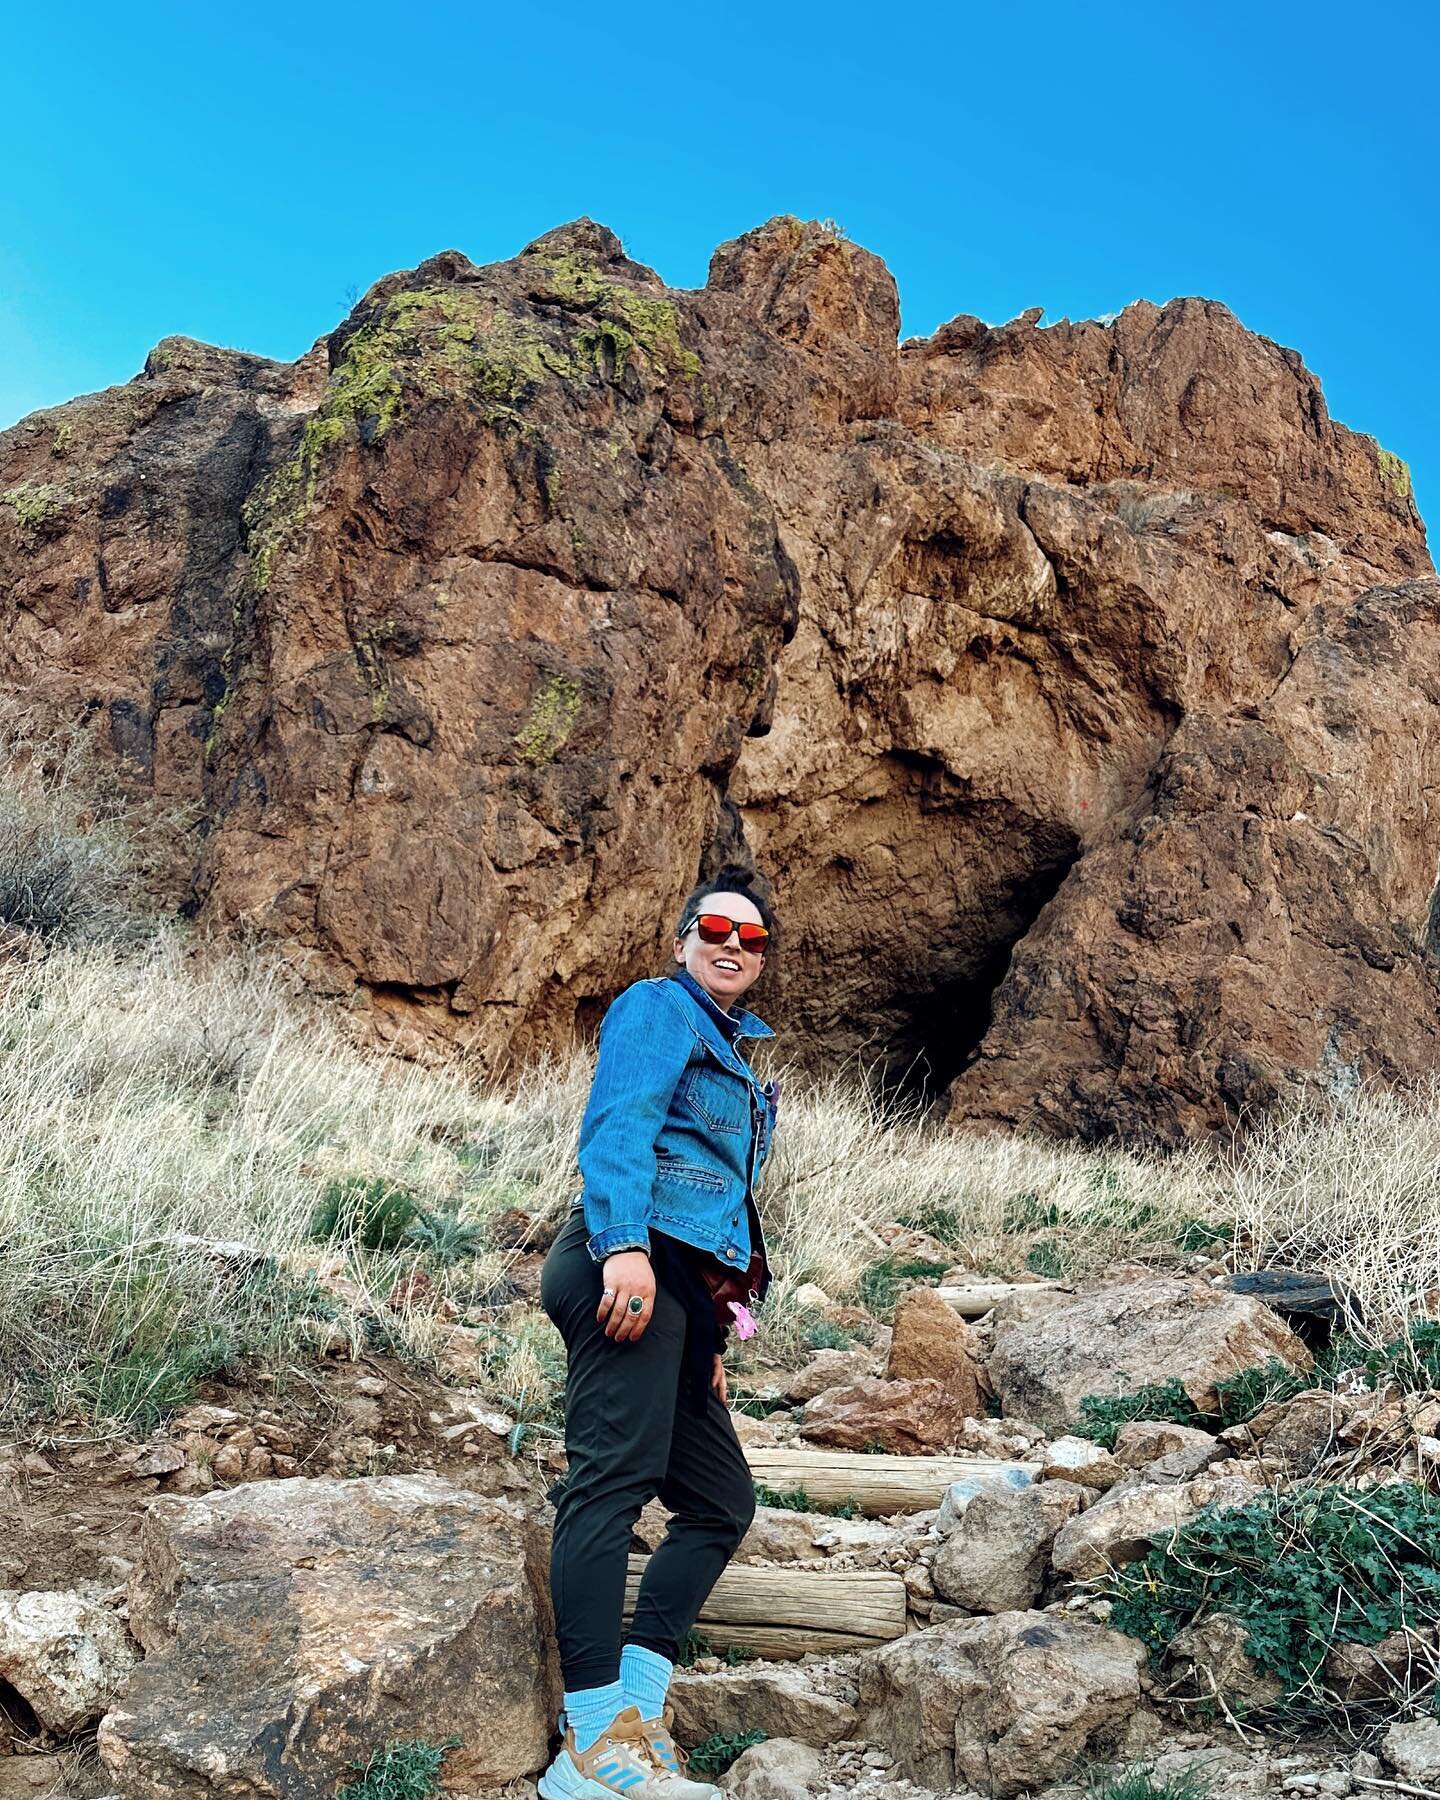 Franklin Mountains State Park
.
.
.
.
🥾 Some light hiking on the Aztec Caves trail at Franklin Mountains State Park
.
💨 It was a windy morning! But, the hike was fantastic. Caves at the end of the trail are really cool!!!
.
.
#hiking #elpaso #visit